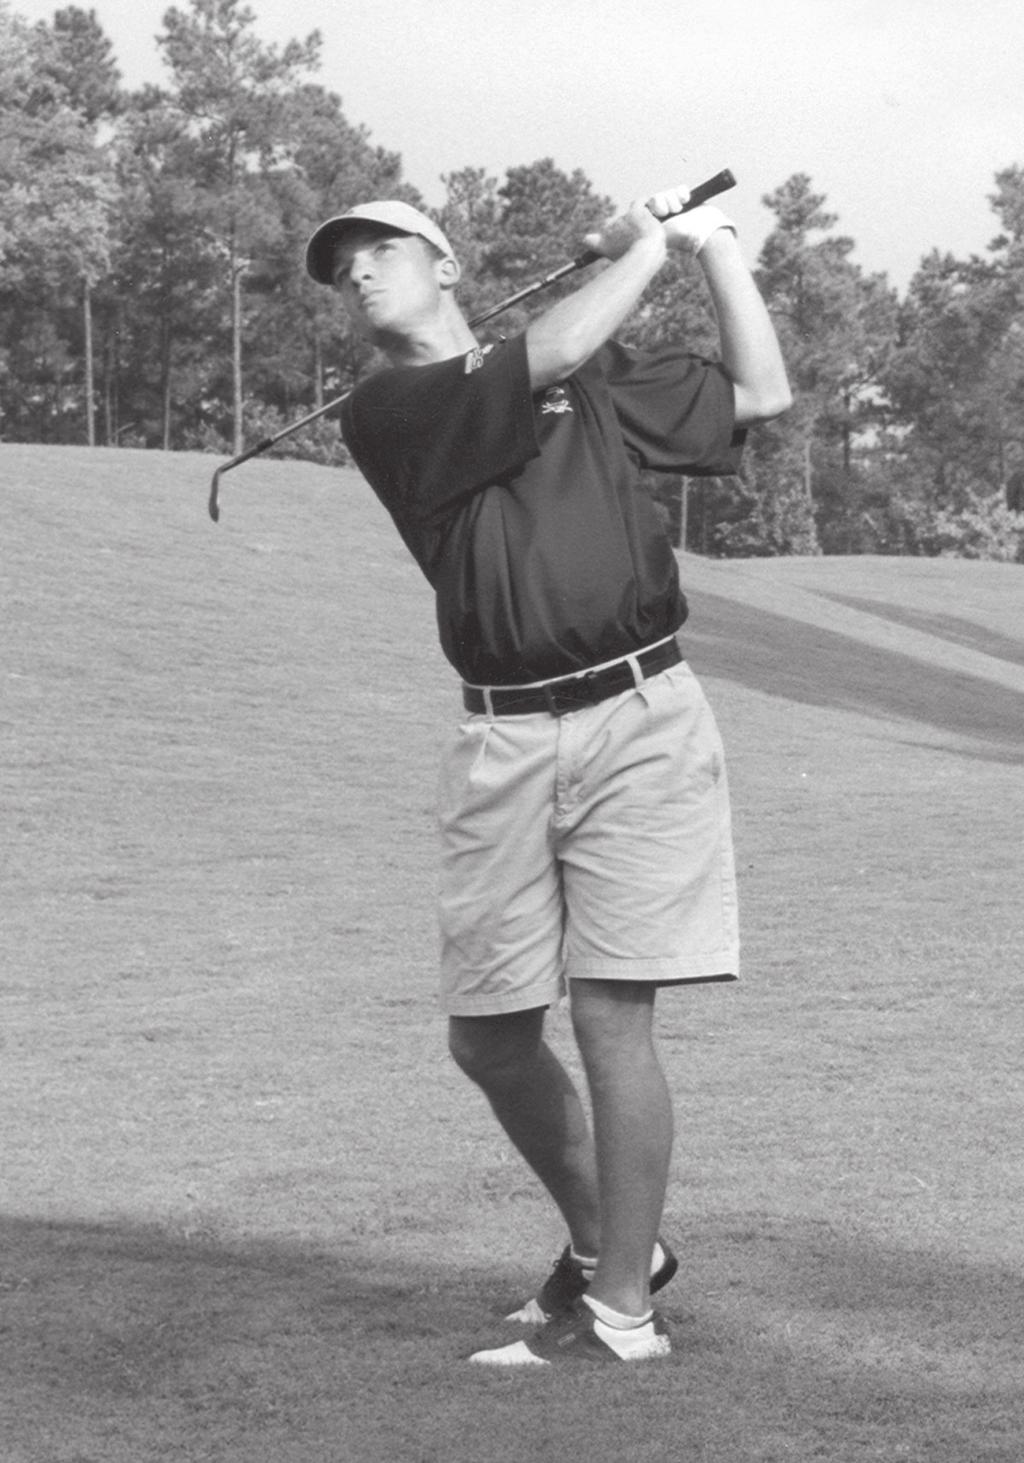 NCAA REGIONAL HISTORY 1989 East Regional - 9th of 19 The Long Bay Club May 25-27 North Myrtle Beach, S.C. 305-294-300=899 Bruce Bolina 77-74-70=221 T-18th Rick Williams 74-74-76=224 T-29th Jeff Hull